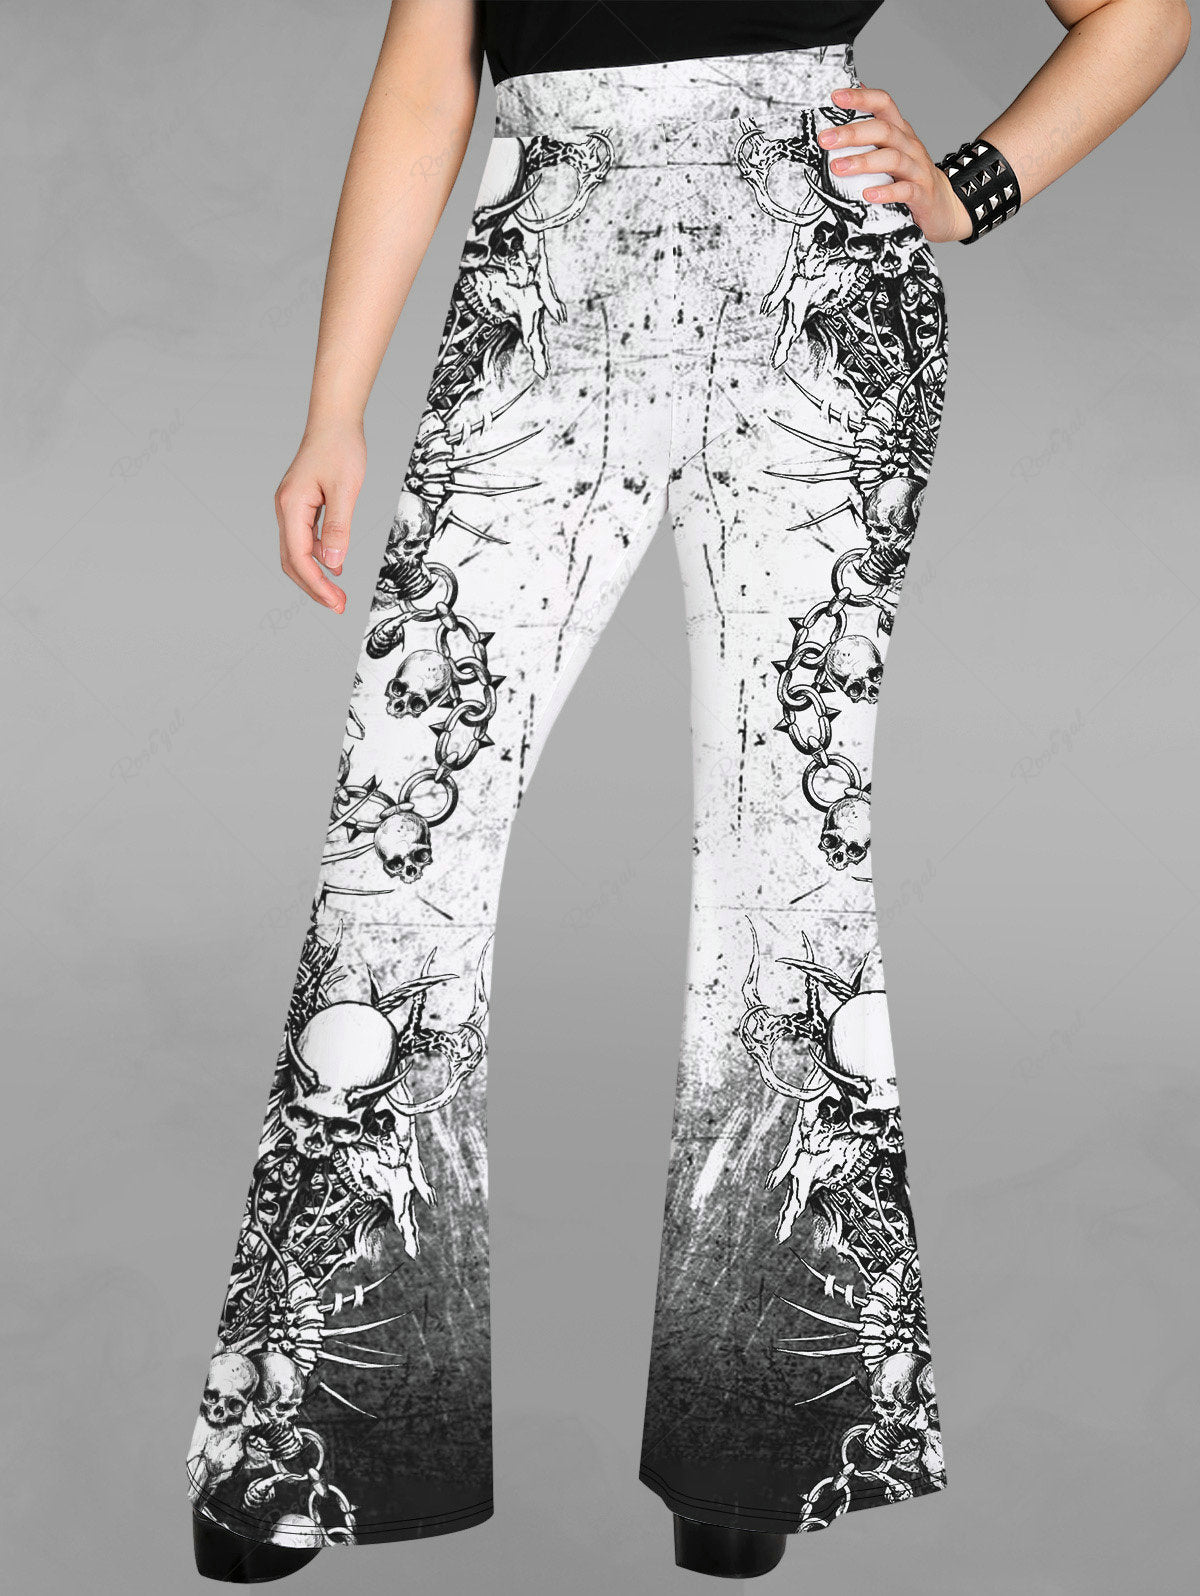 Is That The New Goth Skull & Letter Graphic Leggings ??